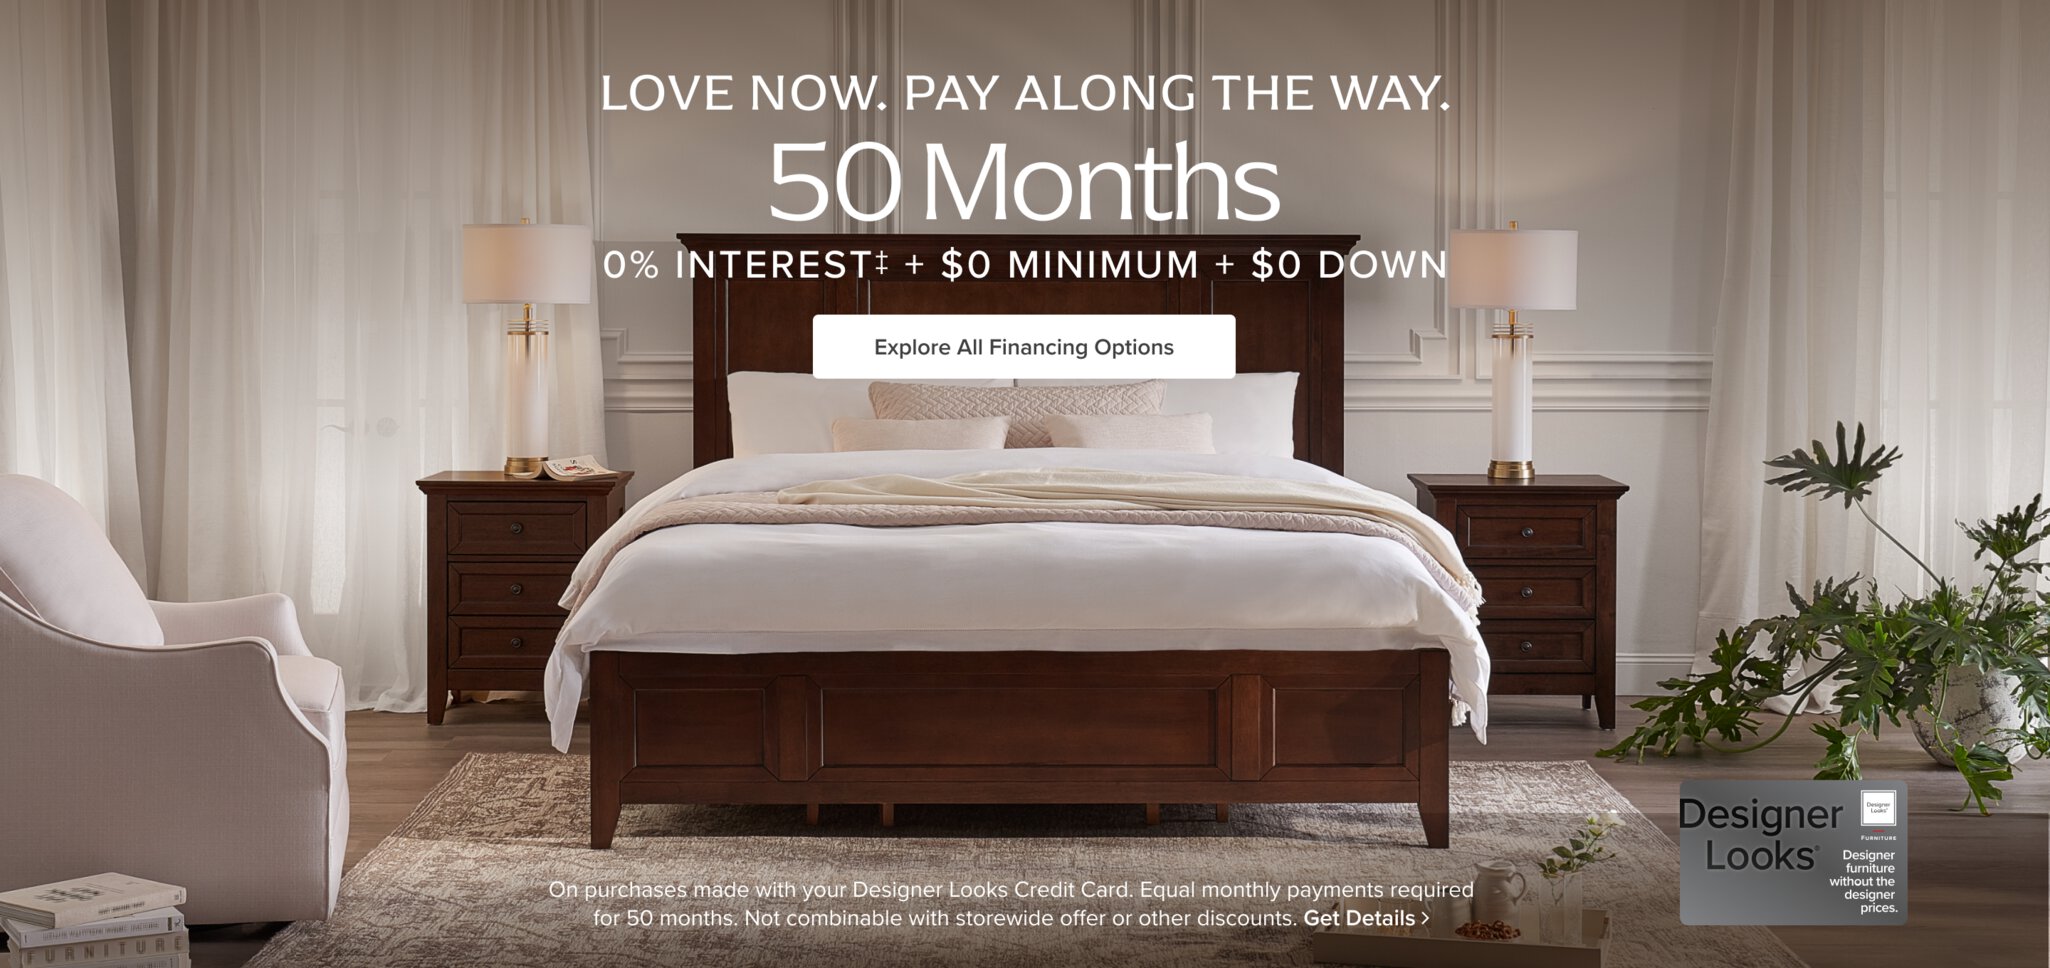 Love now. Pay
      along the way. 50 Months 0% Interest + $0 Minimum + $0 Down Explore all financing options > On purchases made with your designer looks credit card. Equal monthly payments required for 50 months. Not combinable with storewide offer or other discounts. Get Details > 